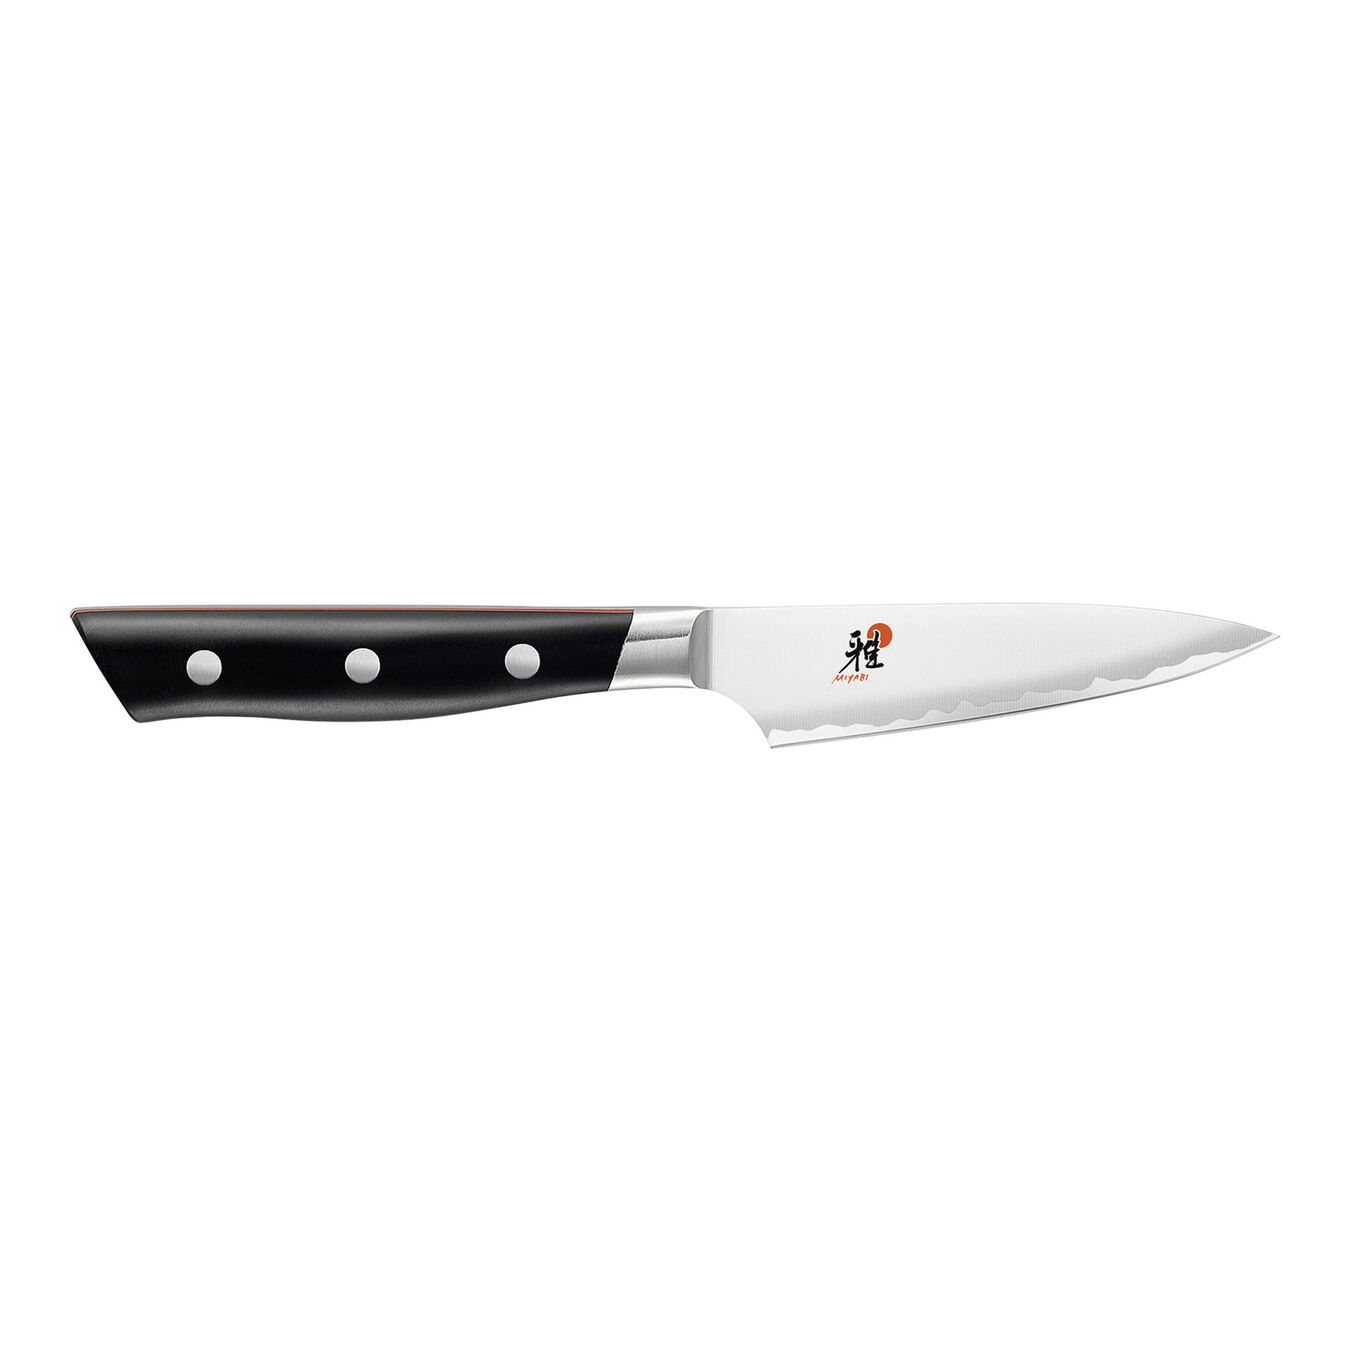 3.5-inch plastic Paring Knife,,large 1